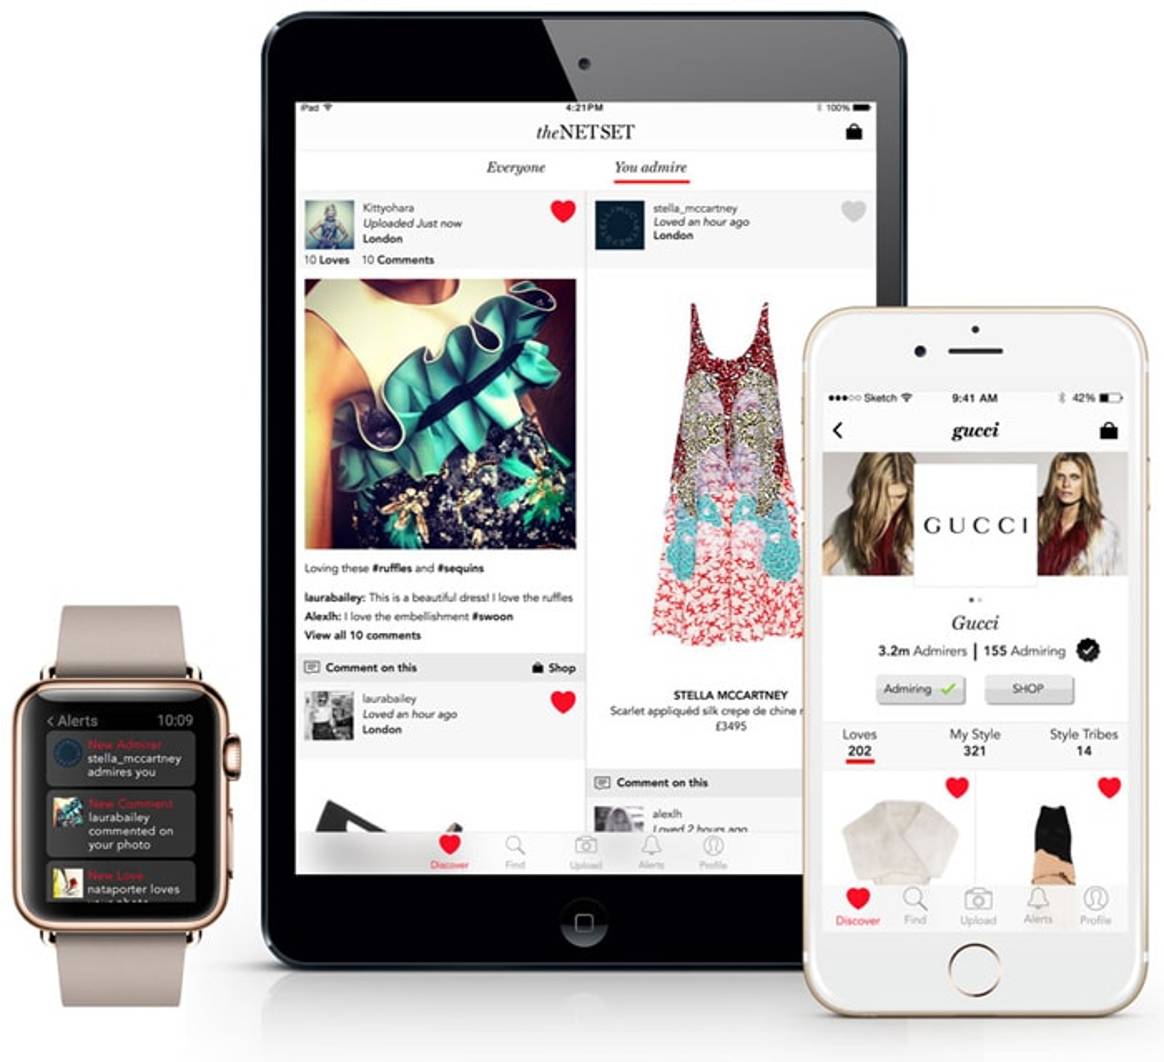 Fashion retailers beware - mobile sales 'may have reached a plateau'